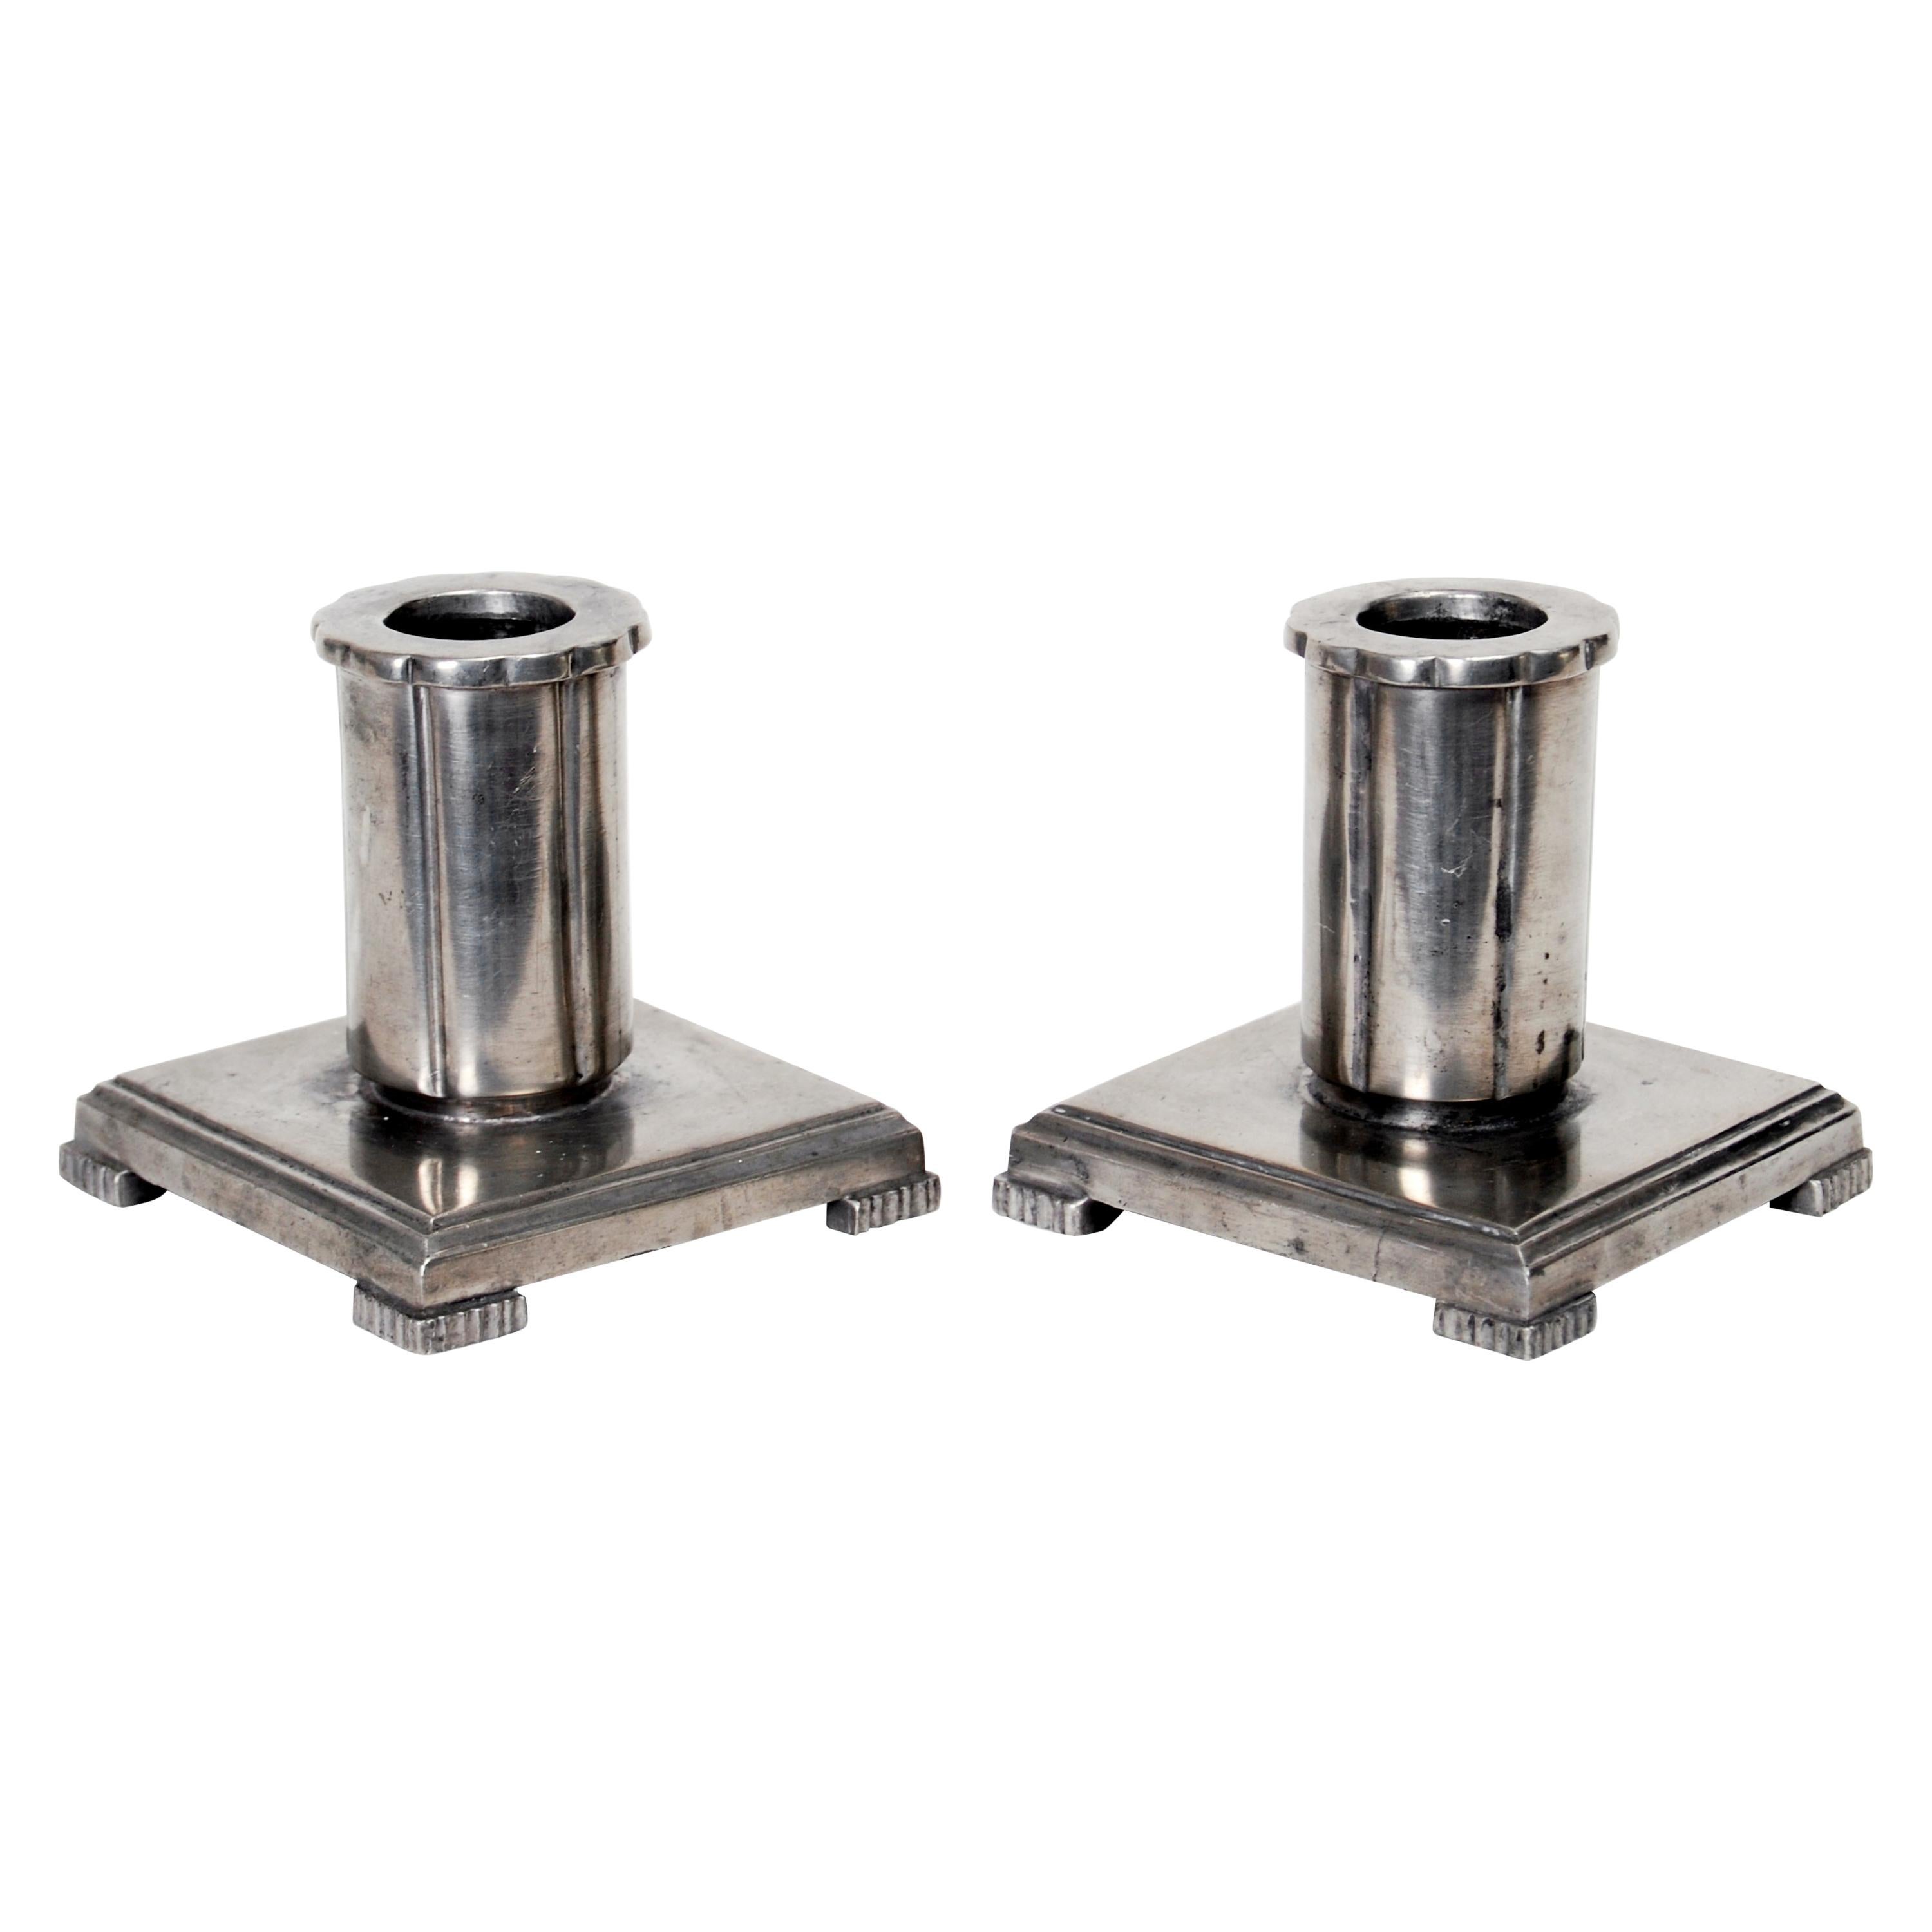 Pair of Art Deco GAB Candleholders in Pewter Attributed to Jacob Ängman, 1933